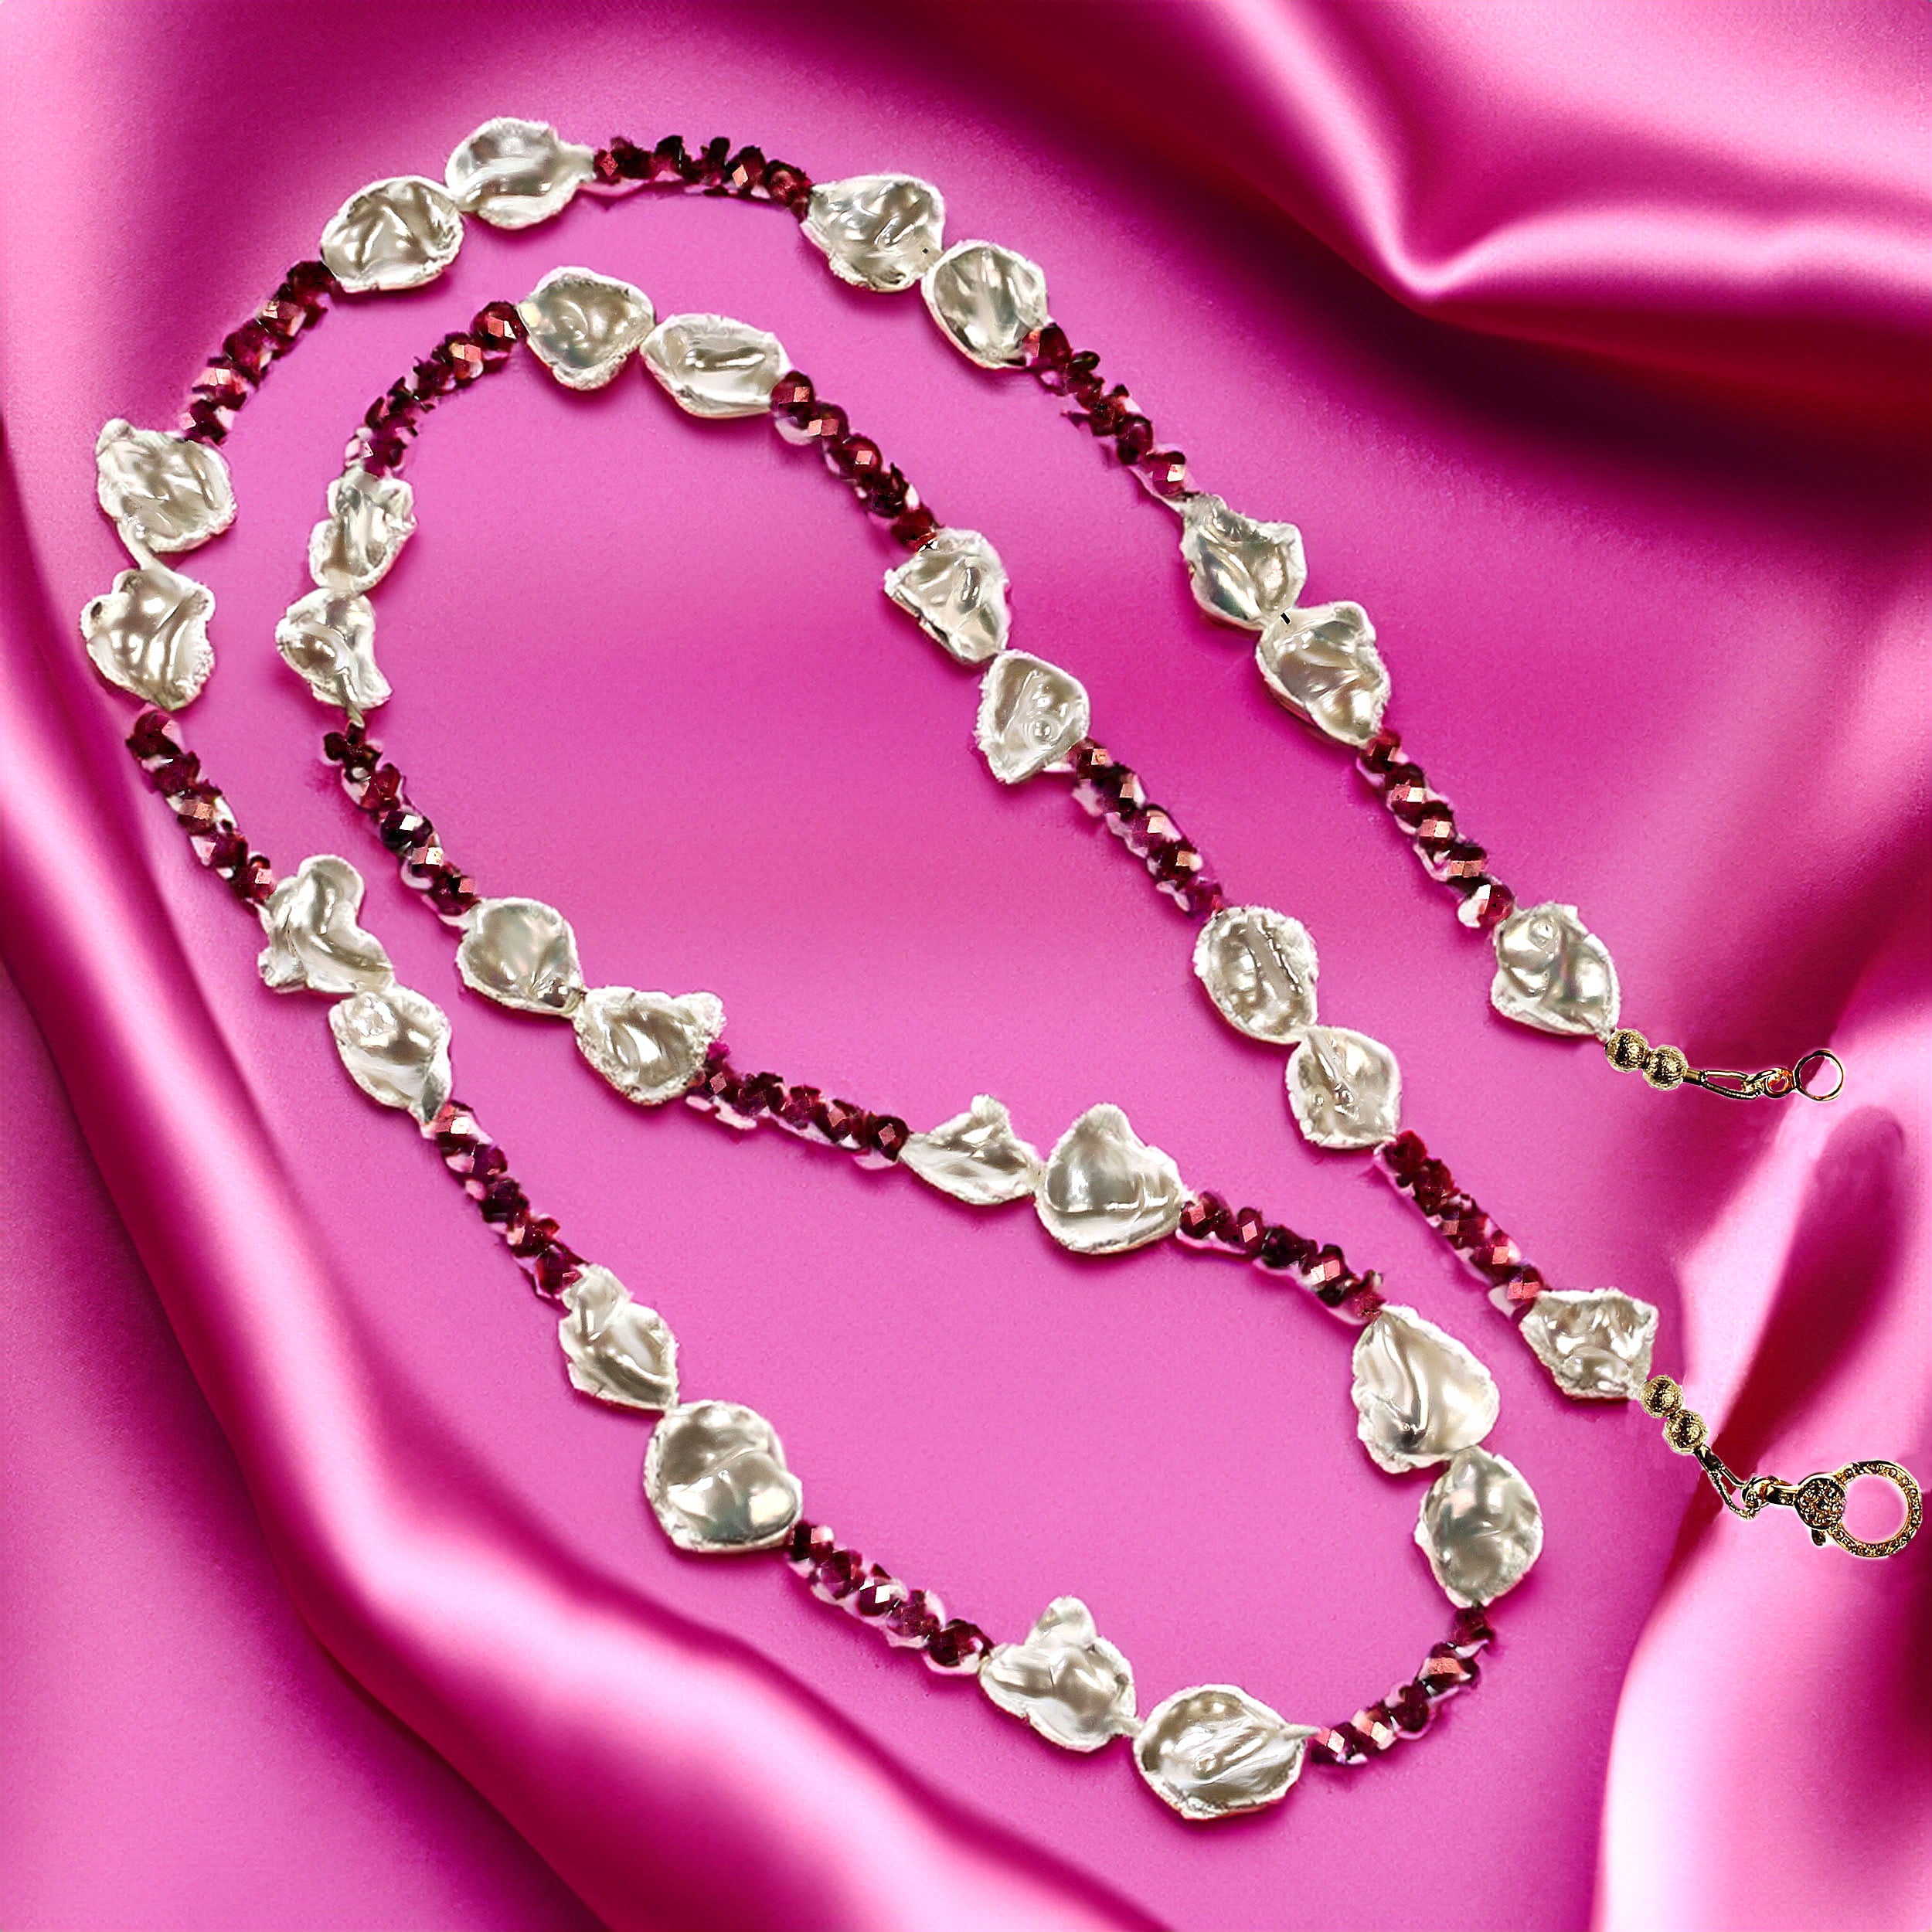 AJD 30 Inch Unique White Pearl and Ruby Necklace    Great Gift!